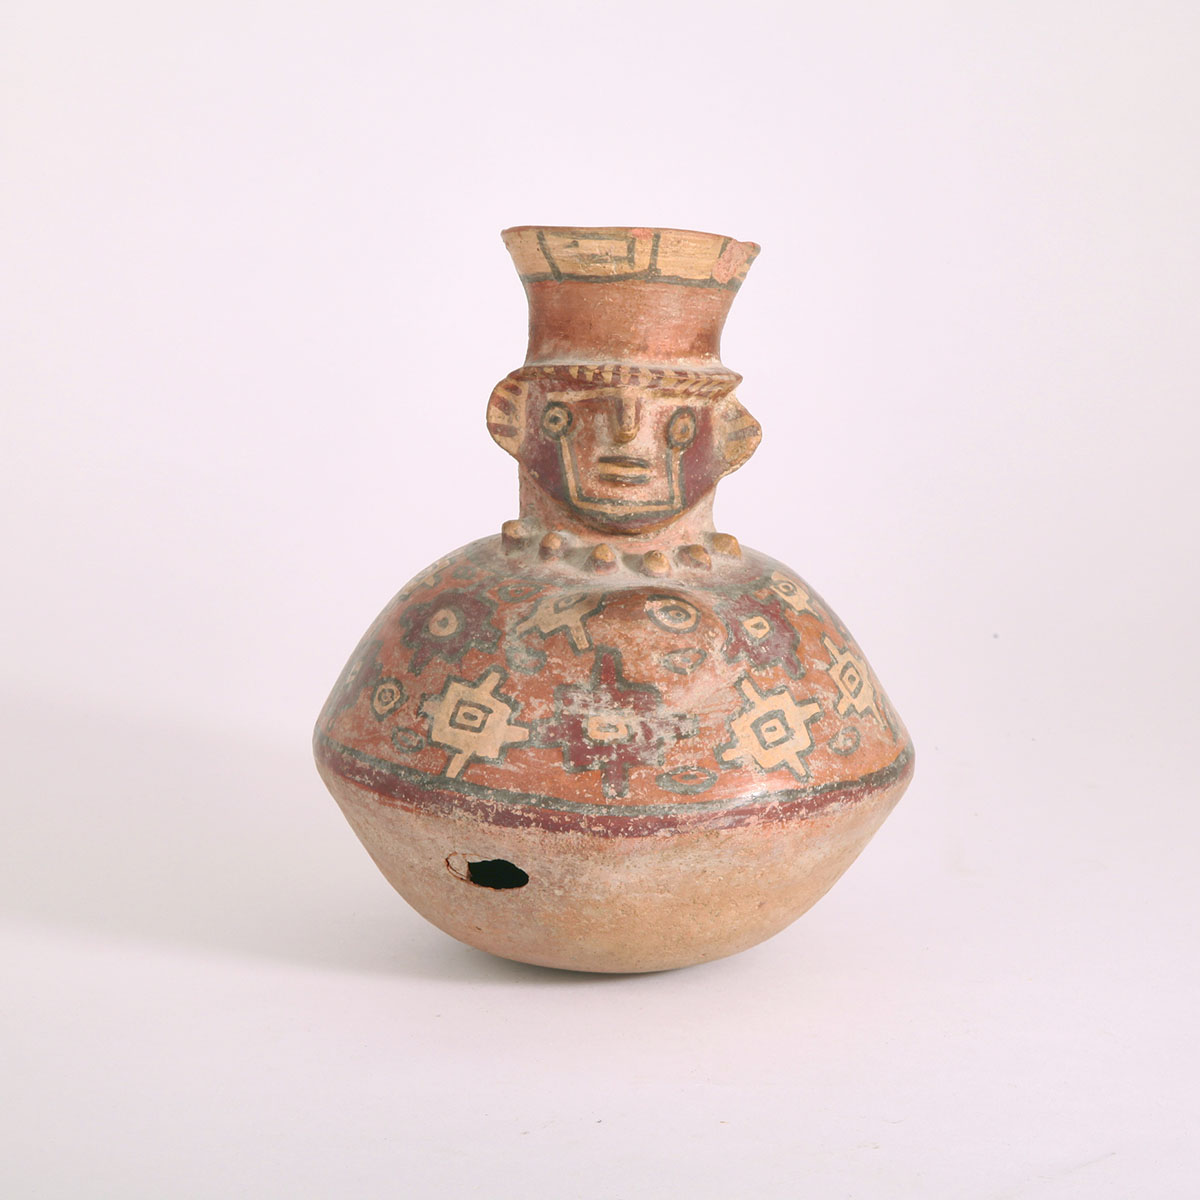 Polychrome Pottery Figural Jug, possibly Chancay